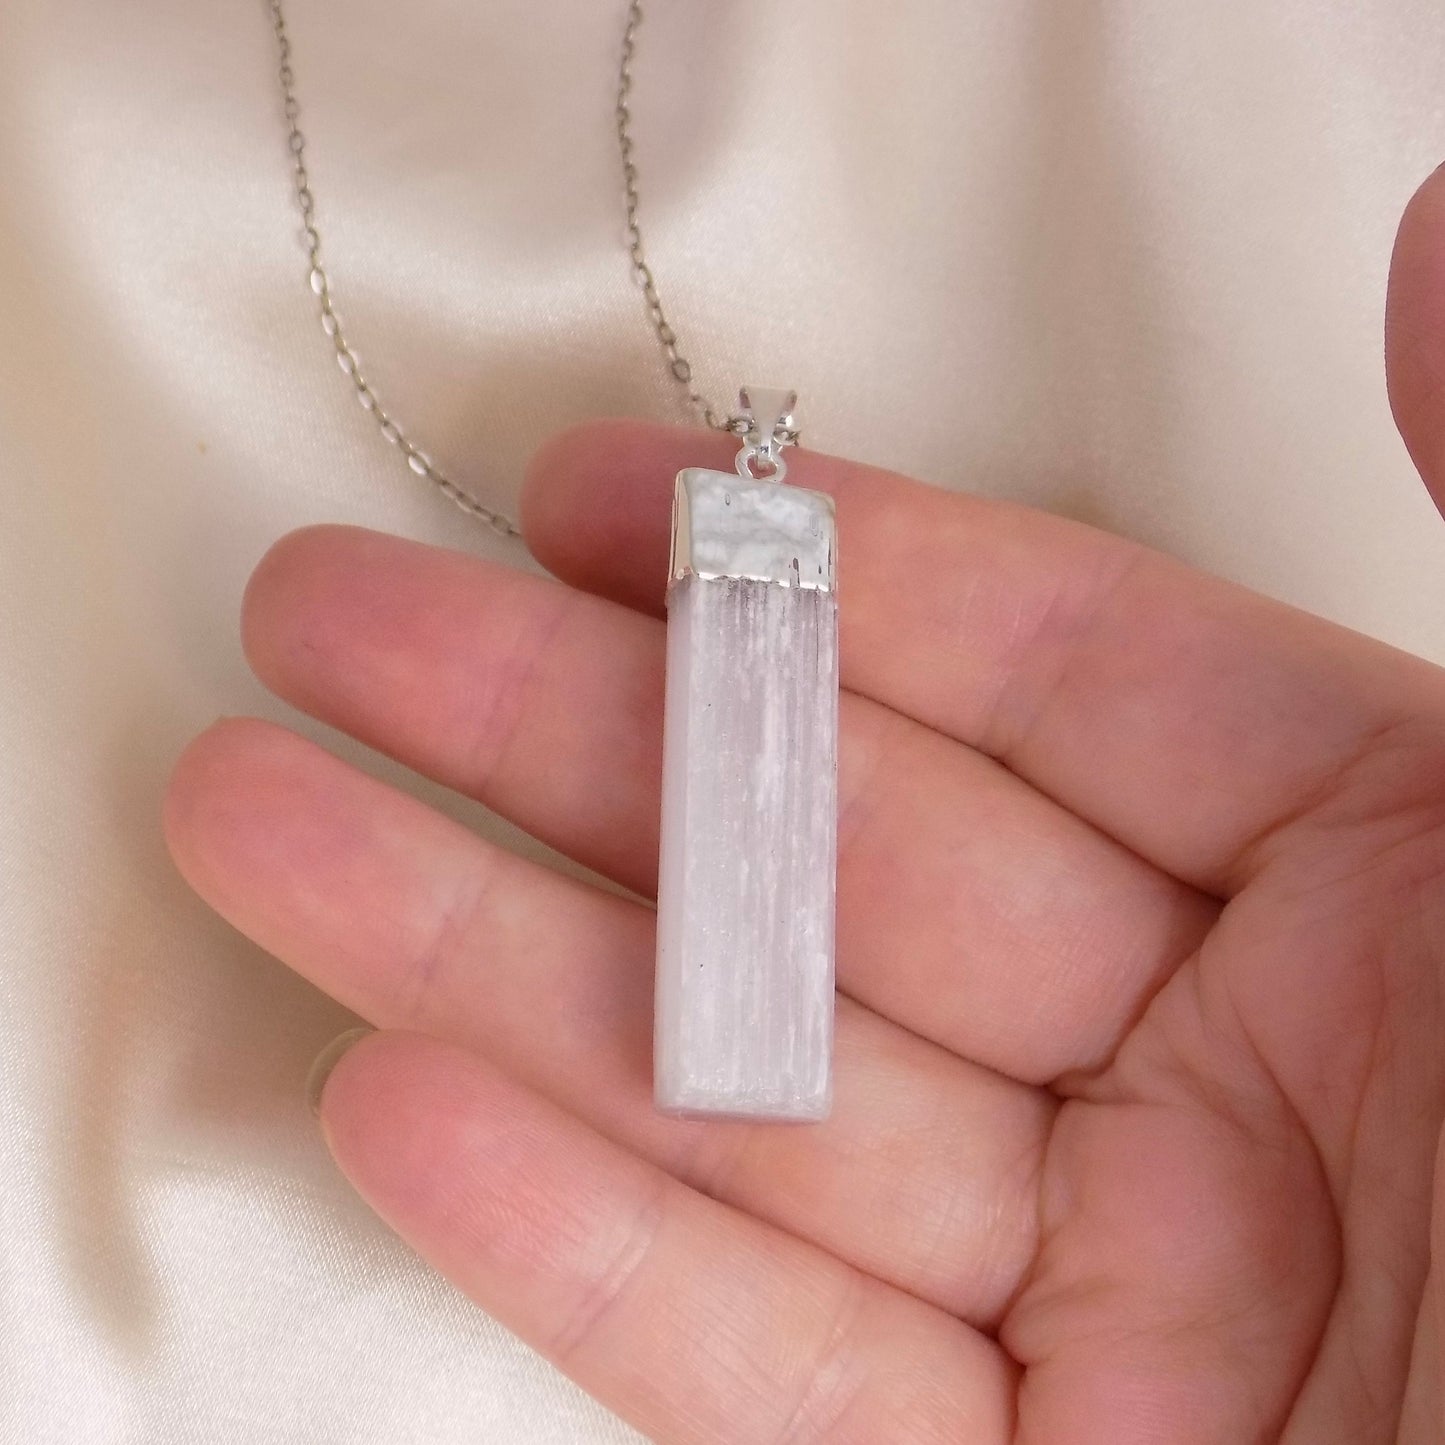 Healing Crystals, Pink Selenite Necklace Silver, Raw Selenite Pendant Necklace, Boho Calming Stone, Gift For Best Friend, G13-543